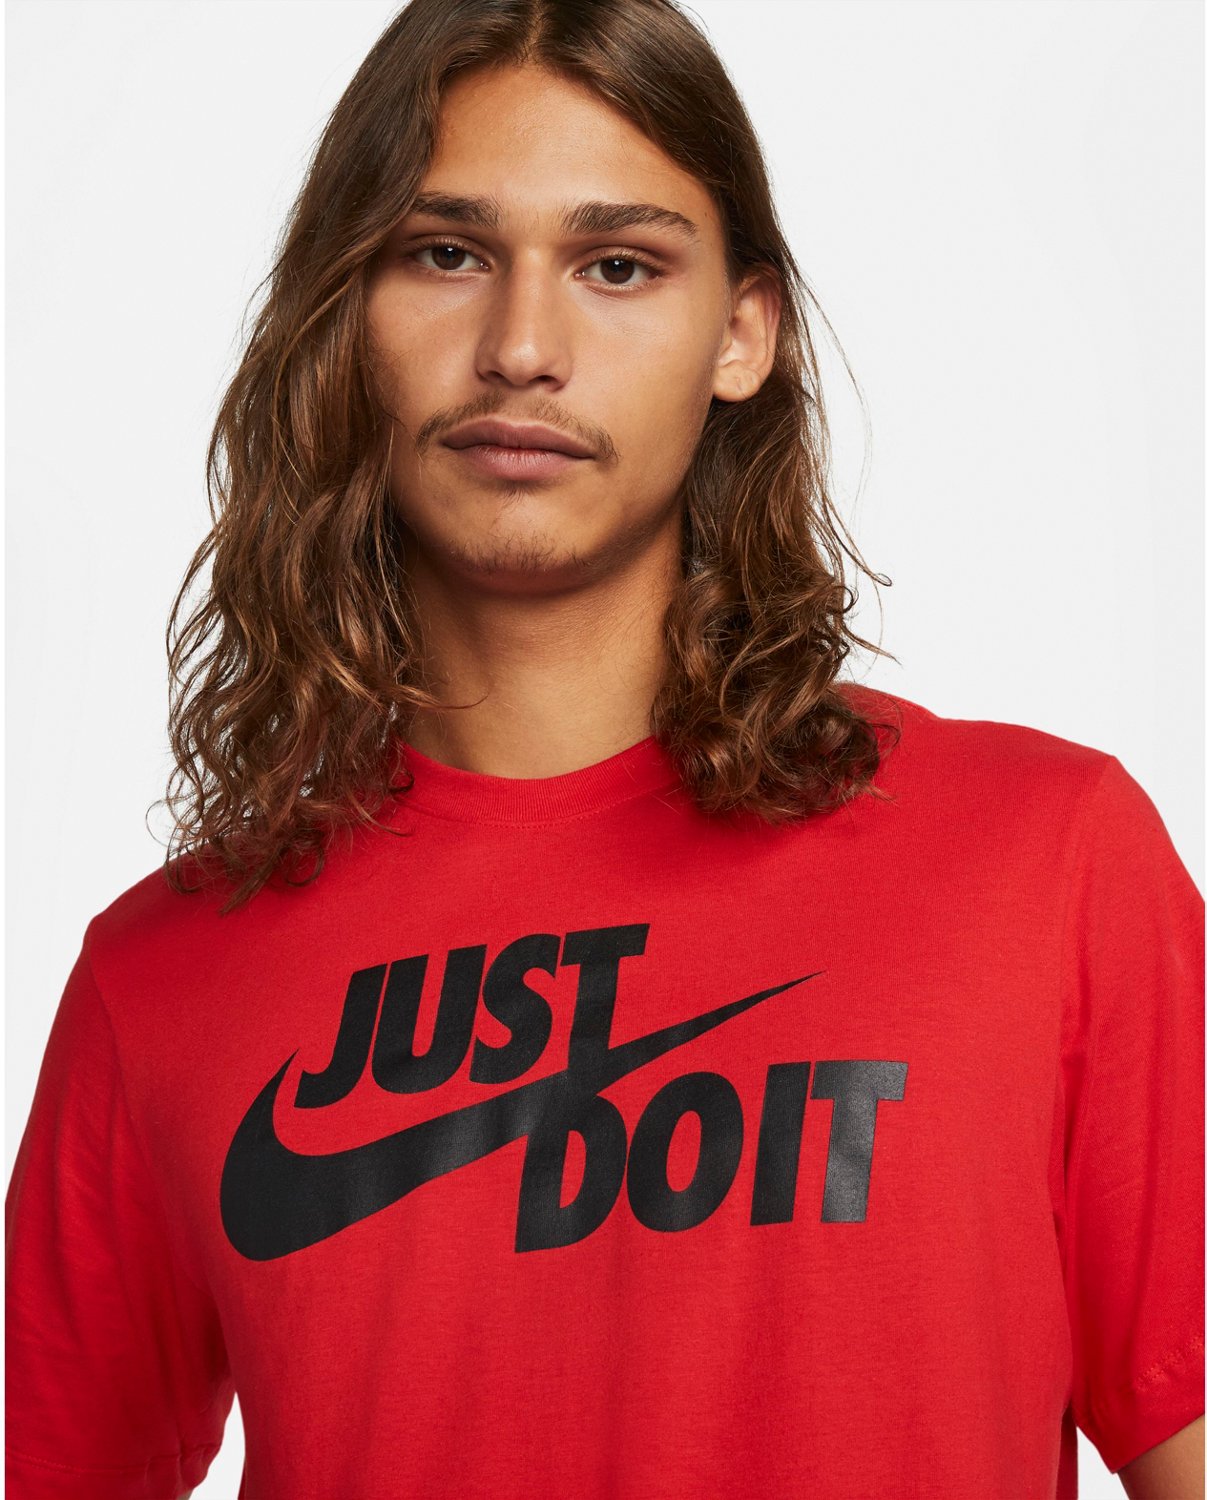 Nike Men\'s Just Do It T-shirt | Free Shipping at Academy